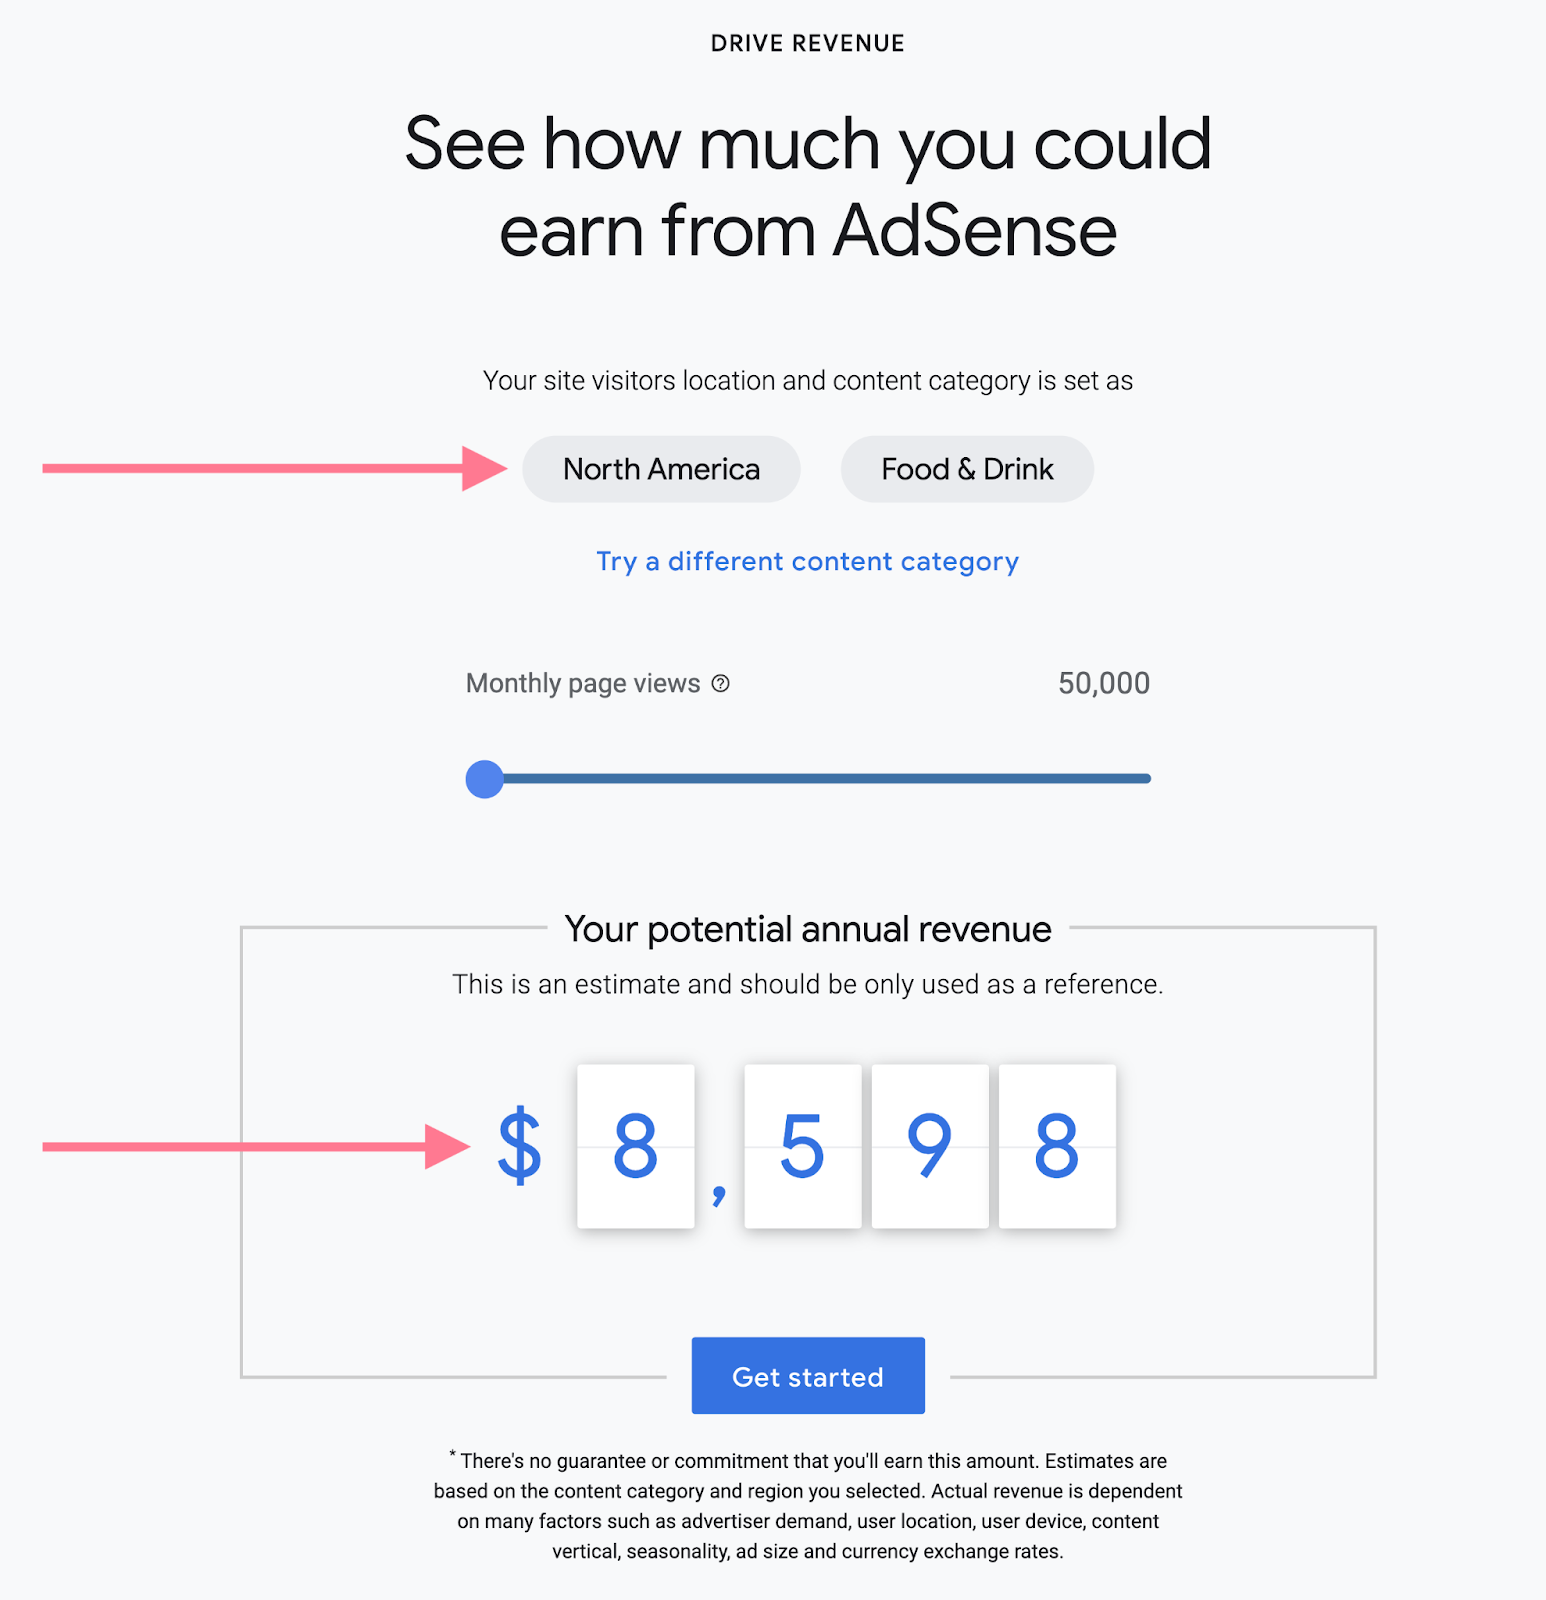 see how much you could earn from adsense